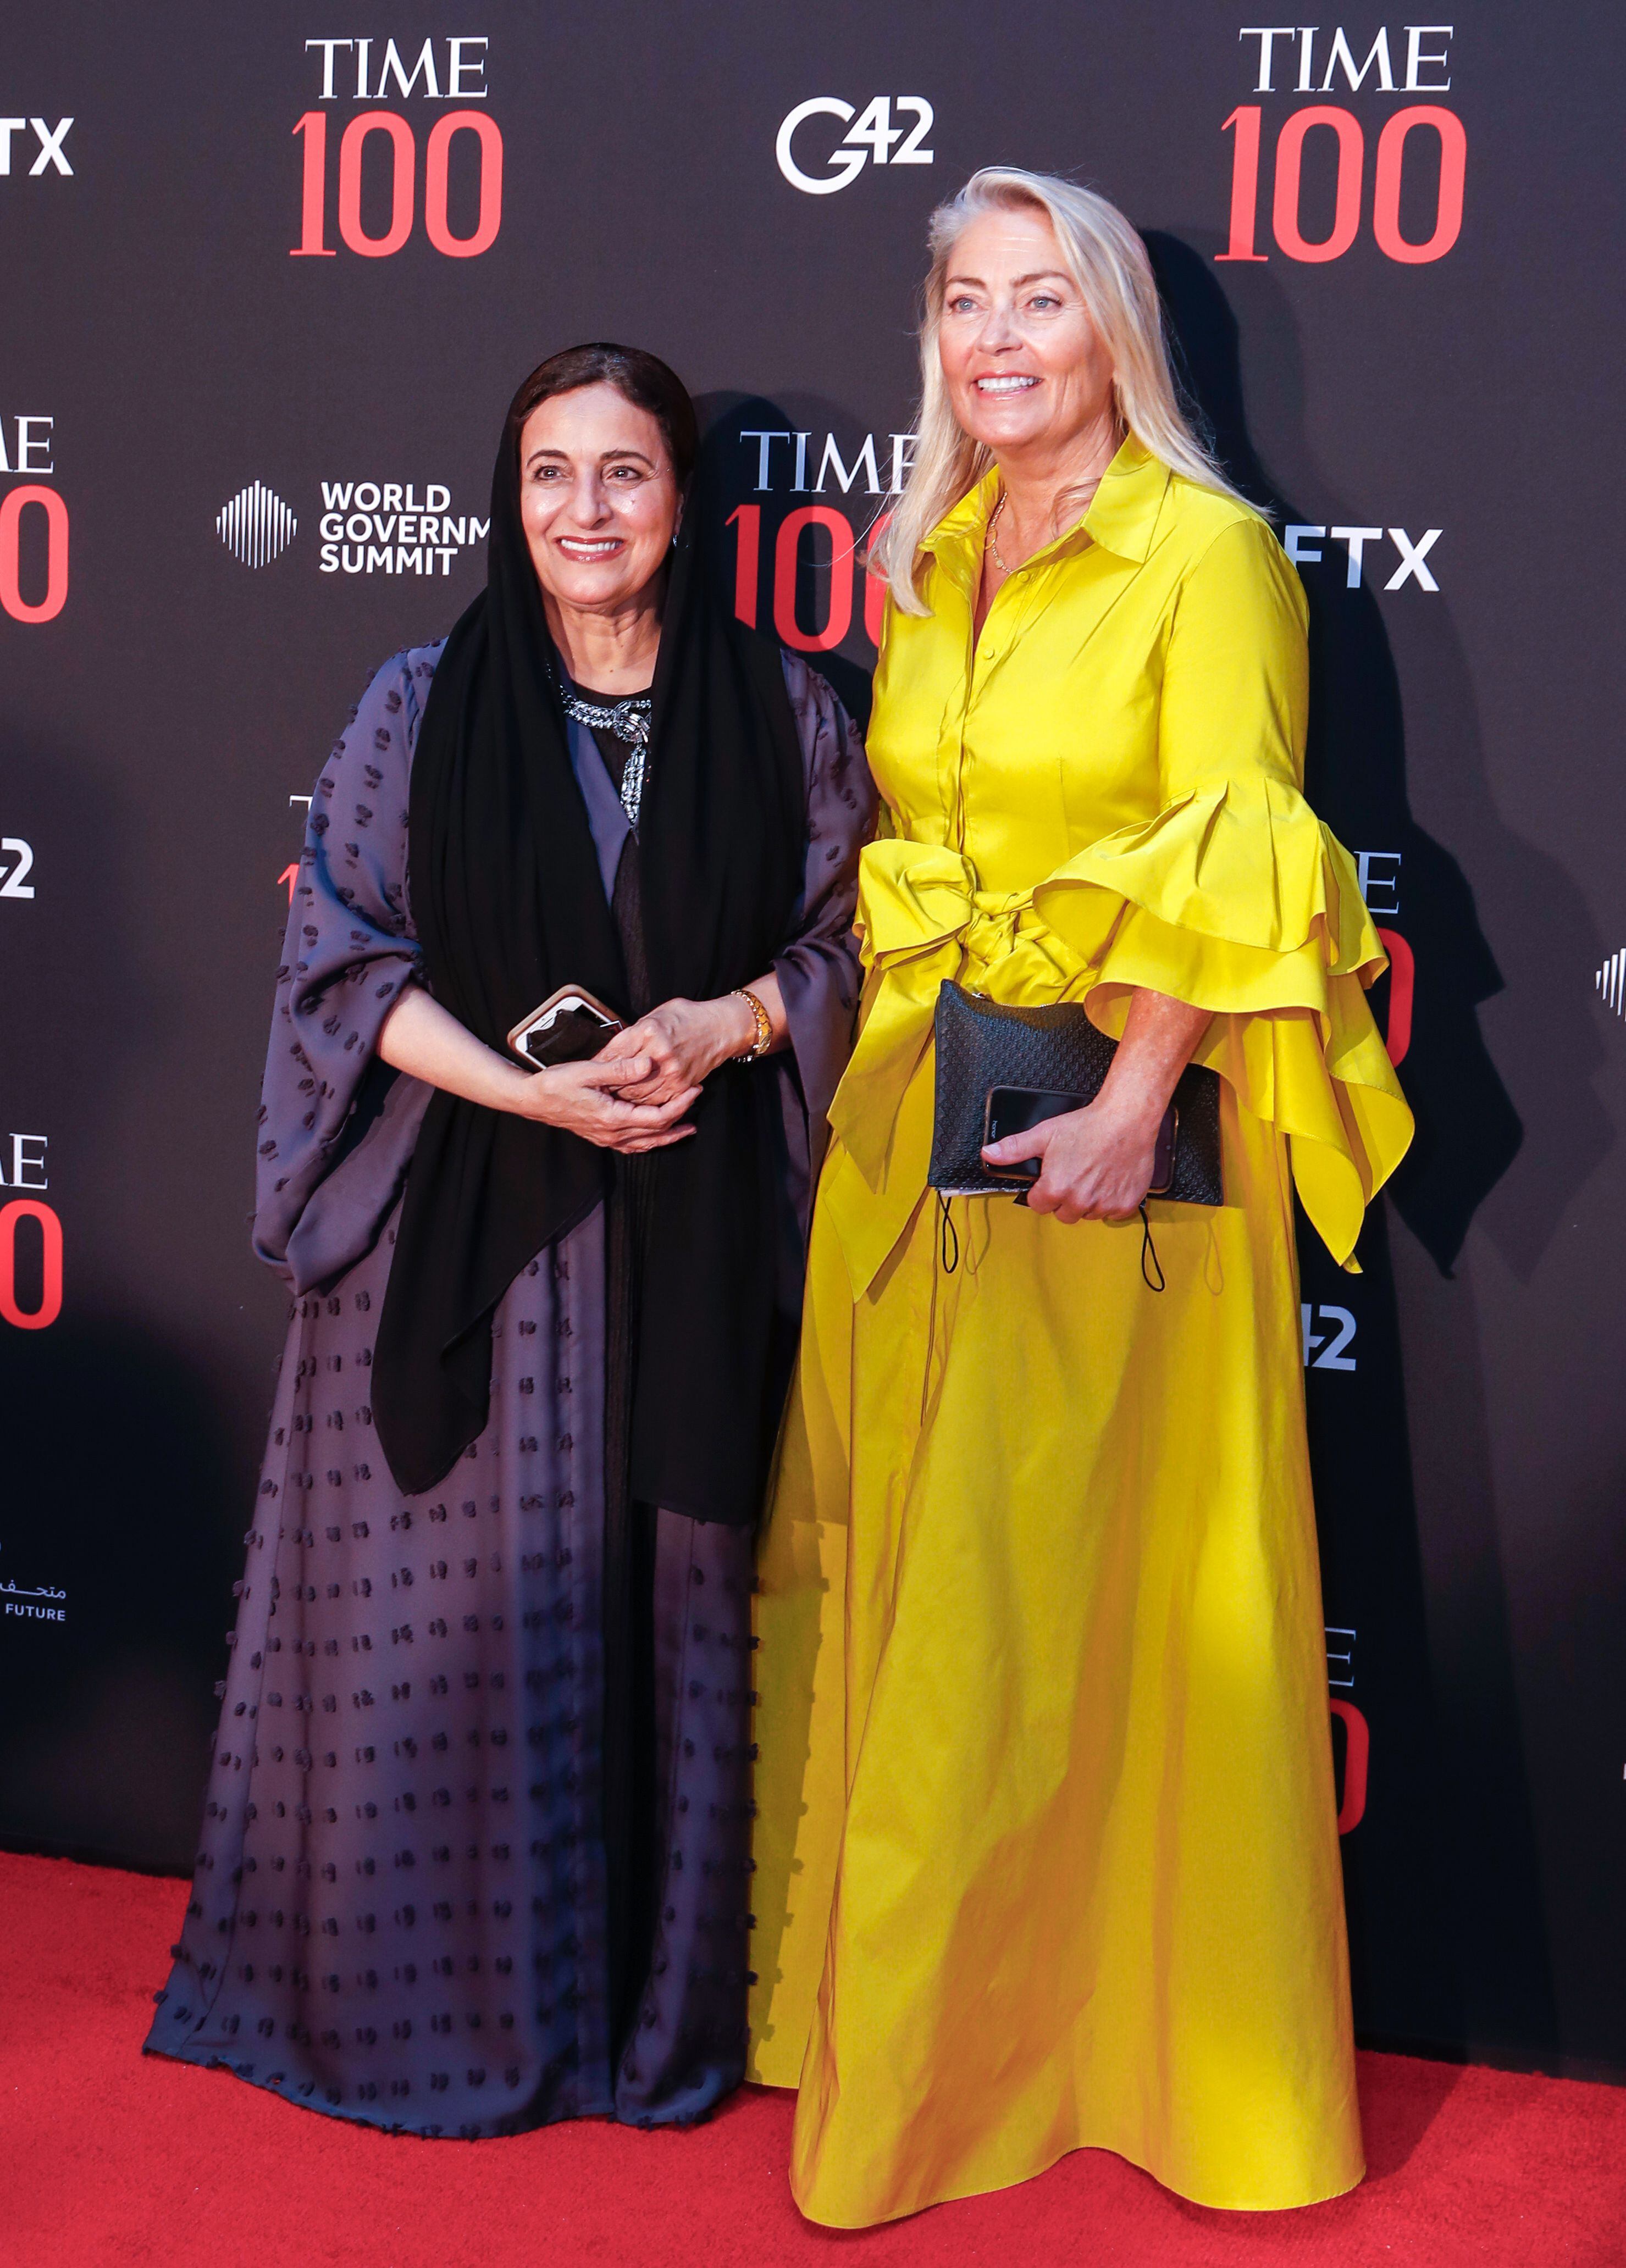 Lina Abu Akleh Is on the TIME100 Next 2022 List